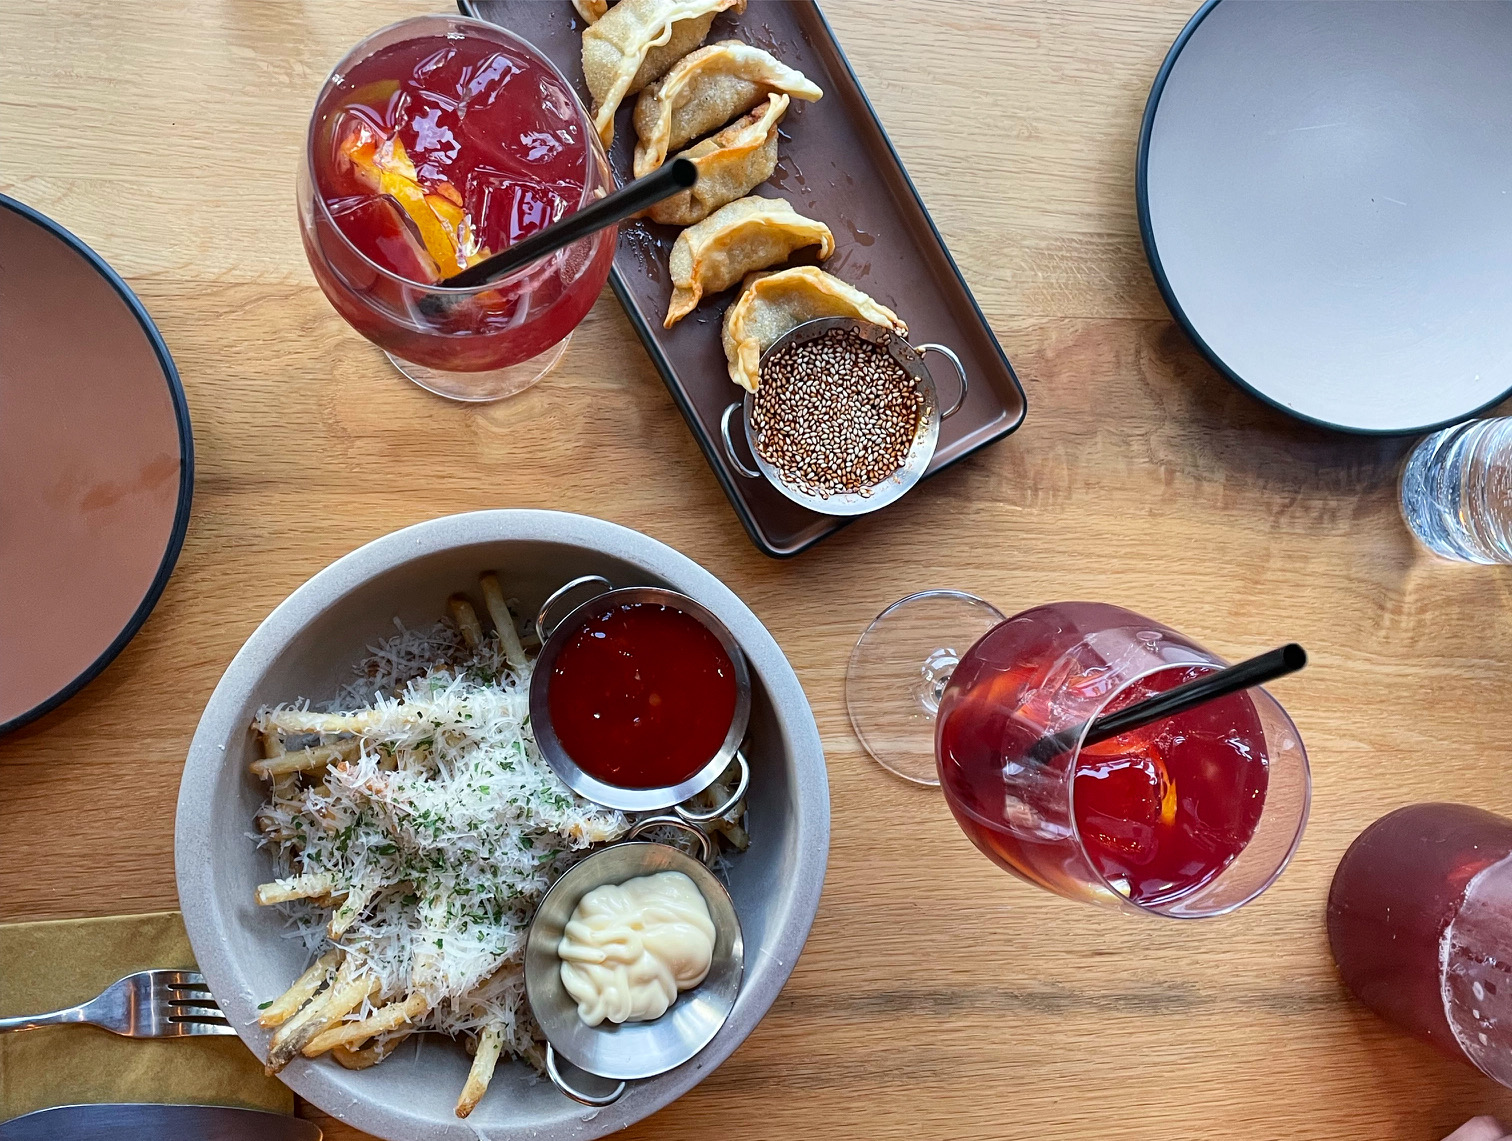 An overhead photo shows a light wooden table with two wine glasses filled with sangria, a rectangular plate of fried dumplings with a little dipping sauce full of sesame seeds, and a bowl of fries covered in Parmesan cheese. Photo by Alyssa Buckley.